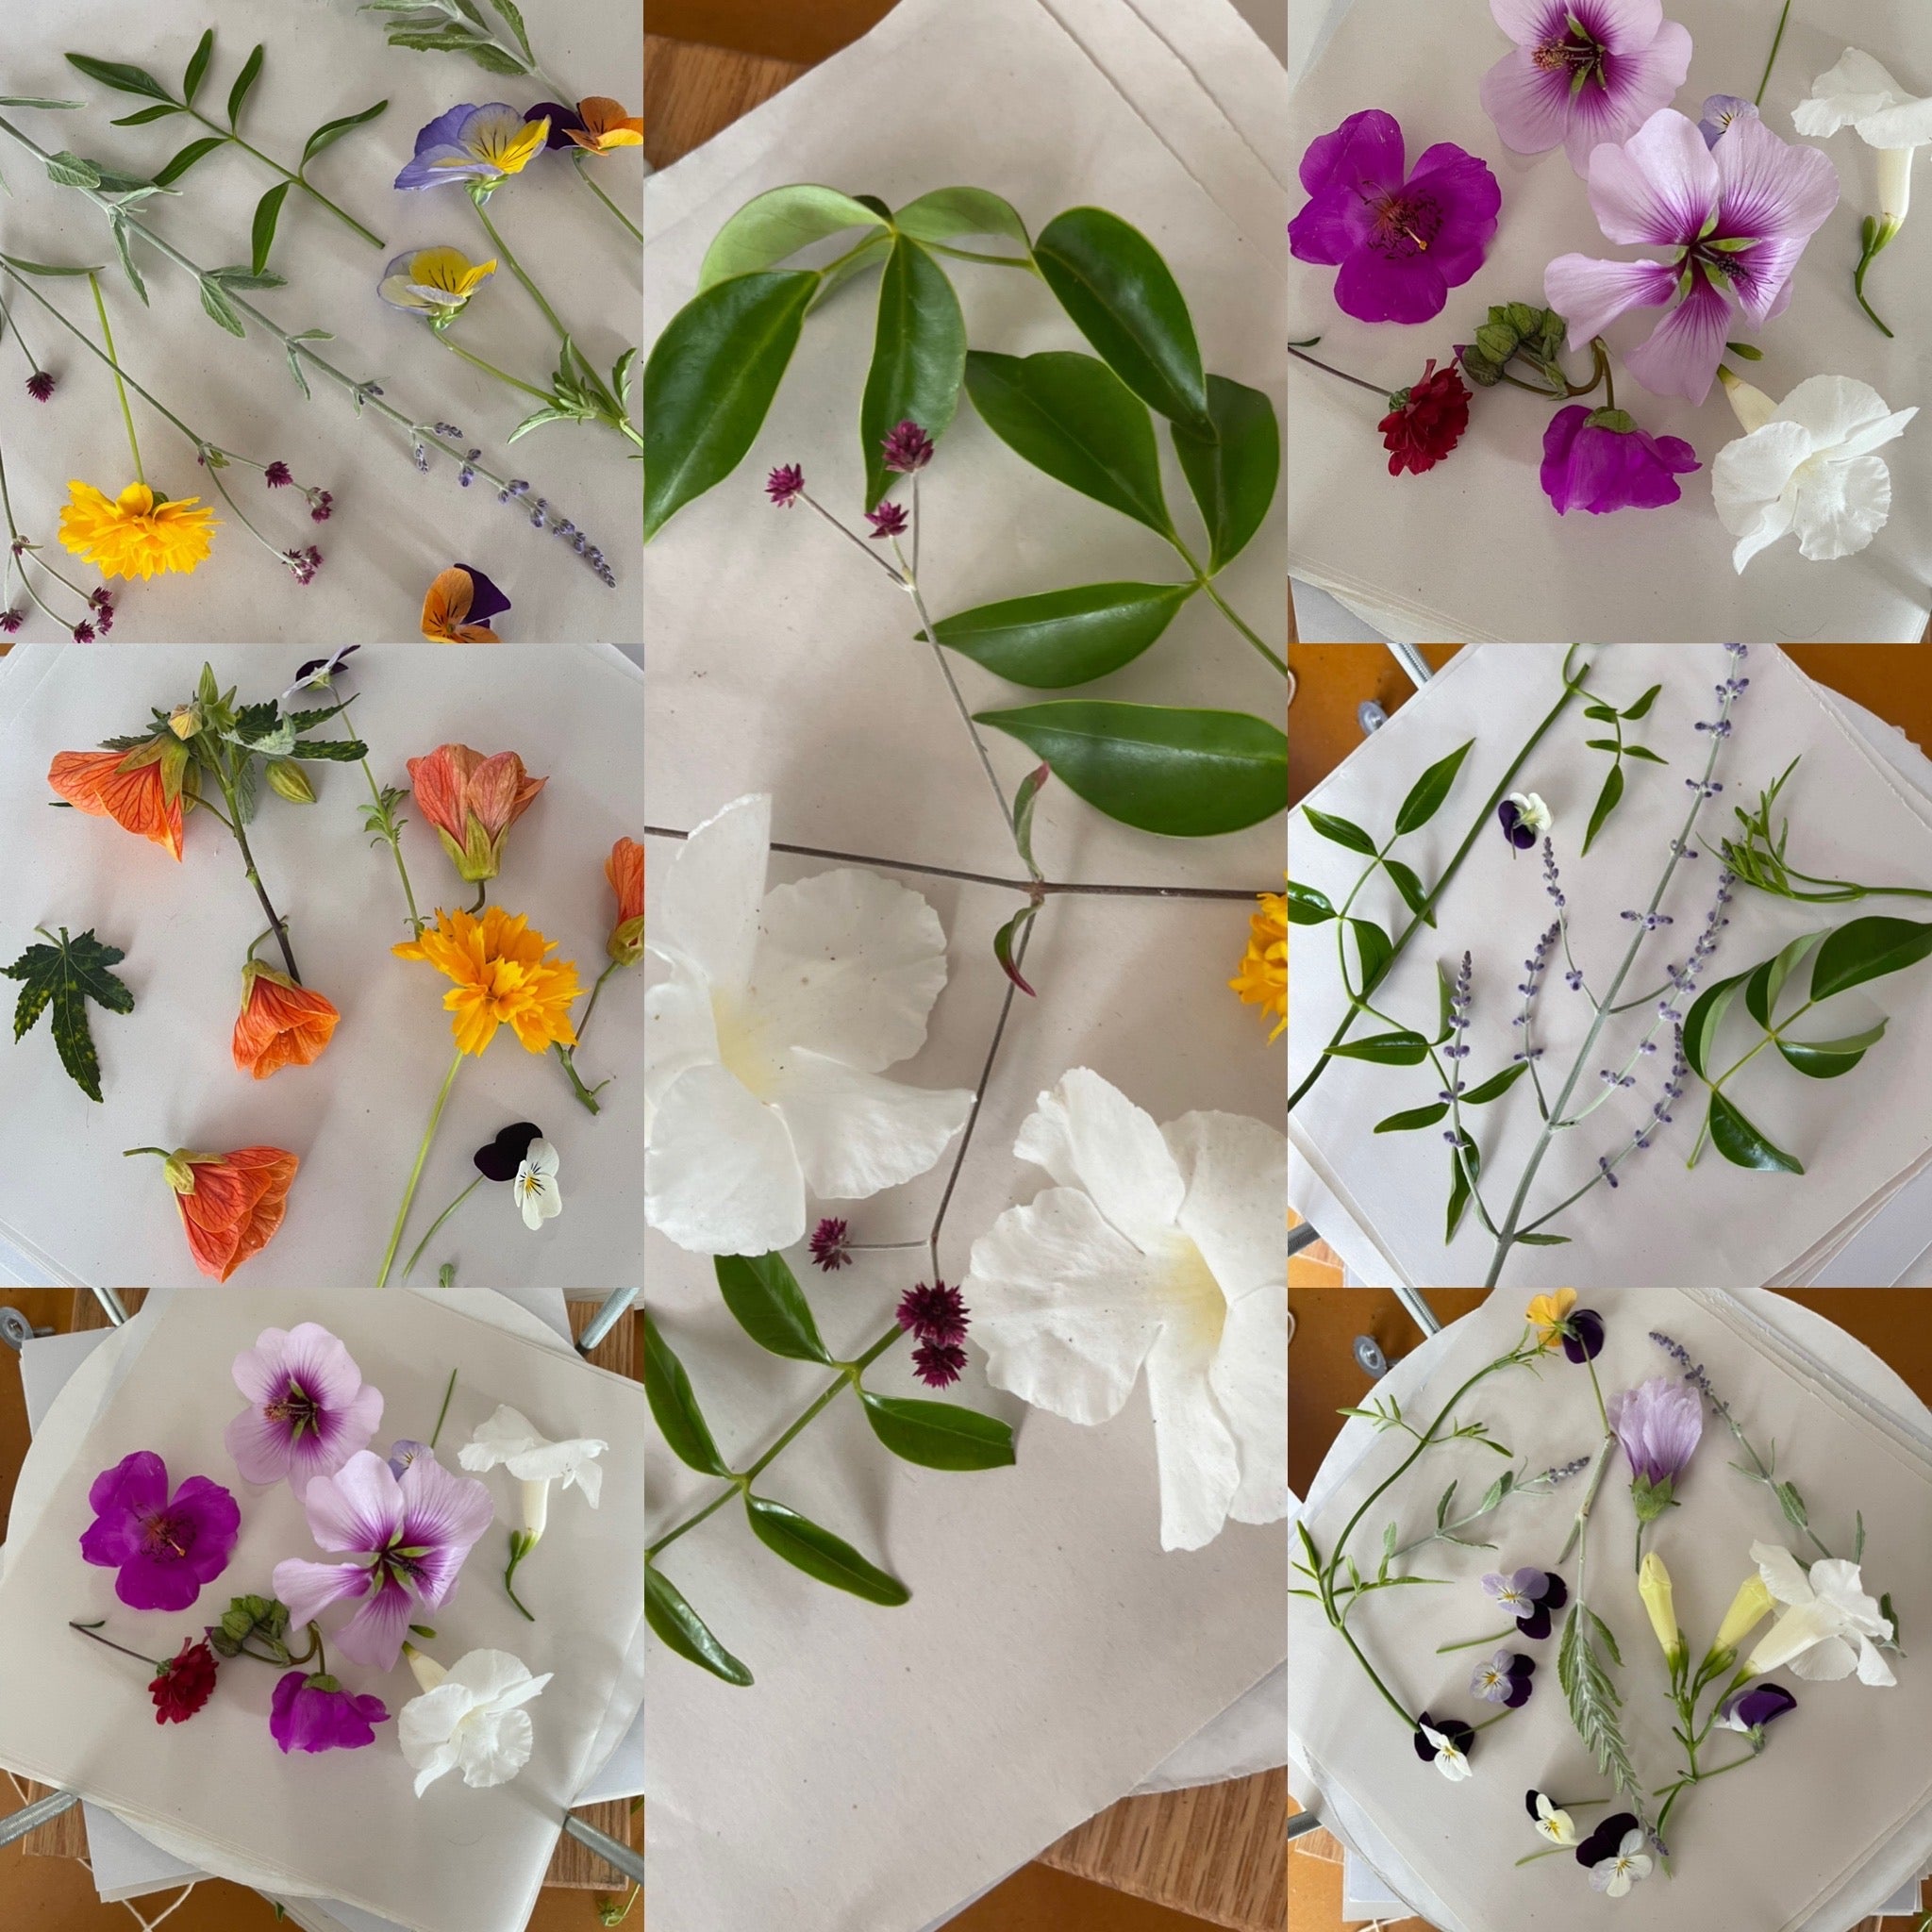 I learned how to dry flowers in one month!